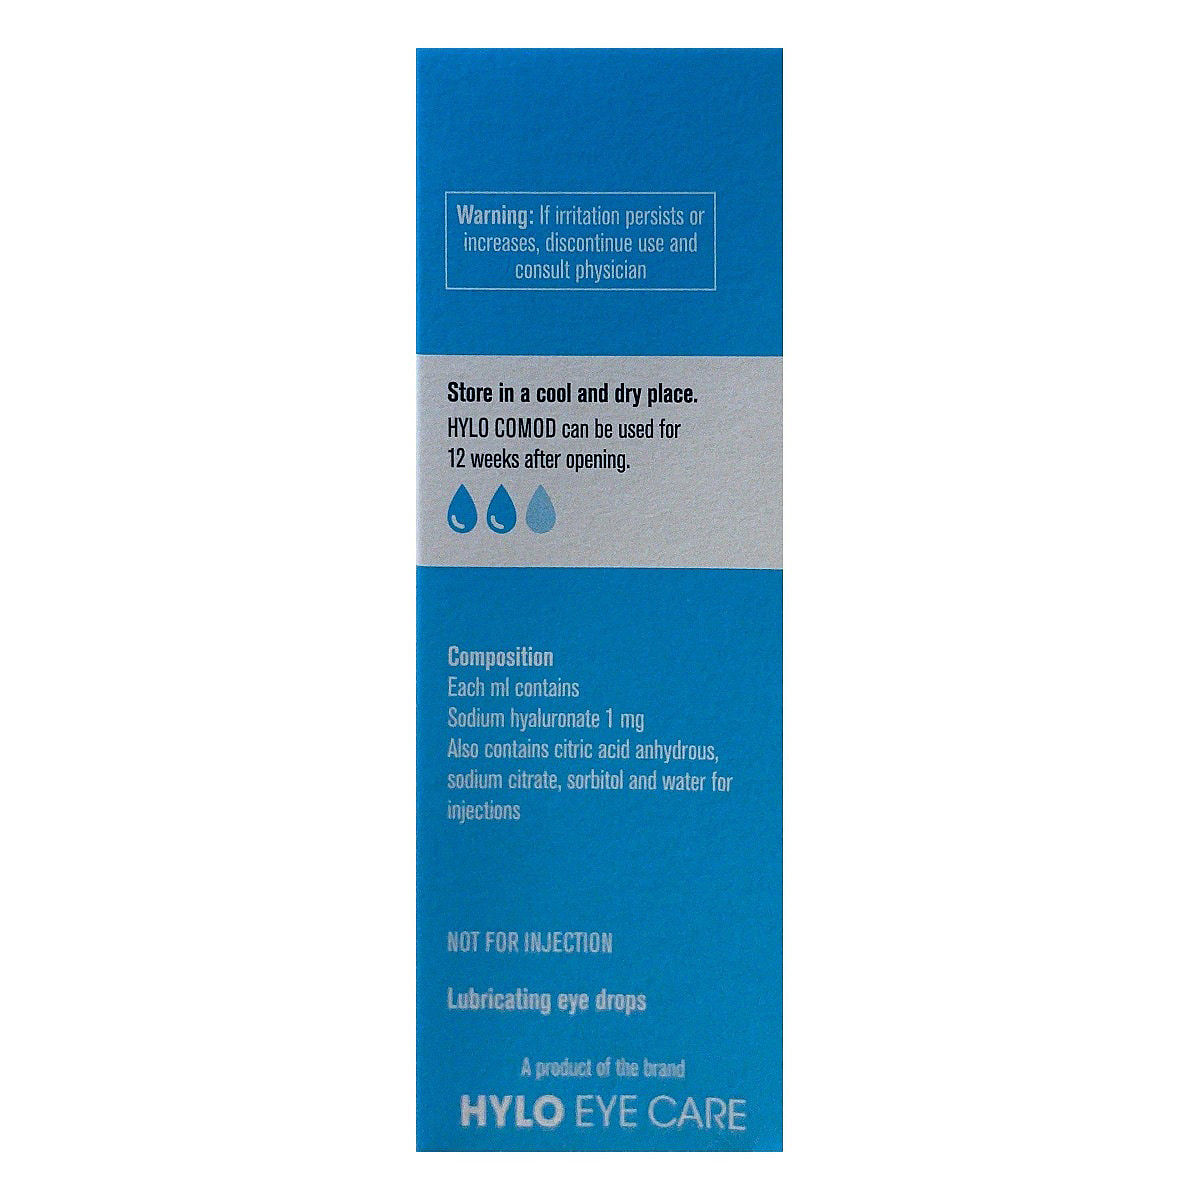 Hylo Comod Eye Drops 10 ml, Pack of 1 